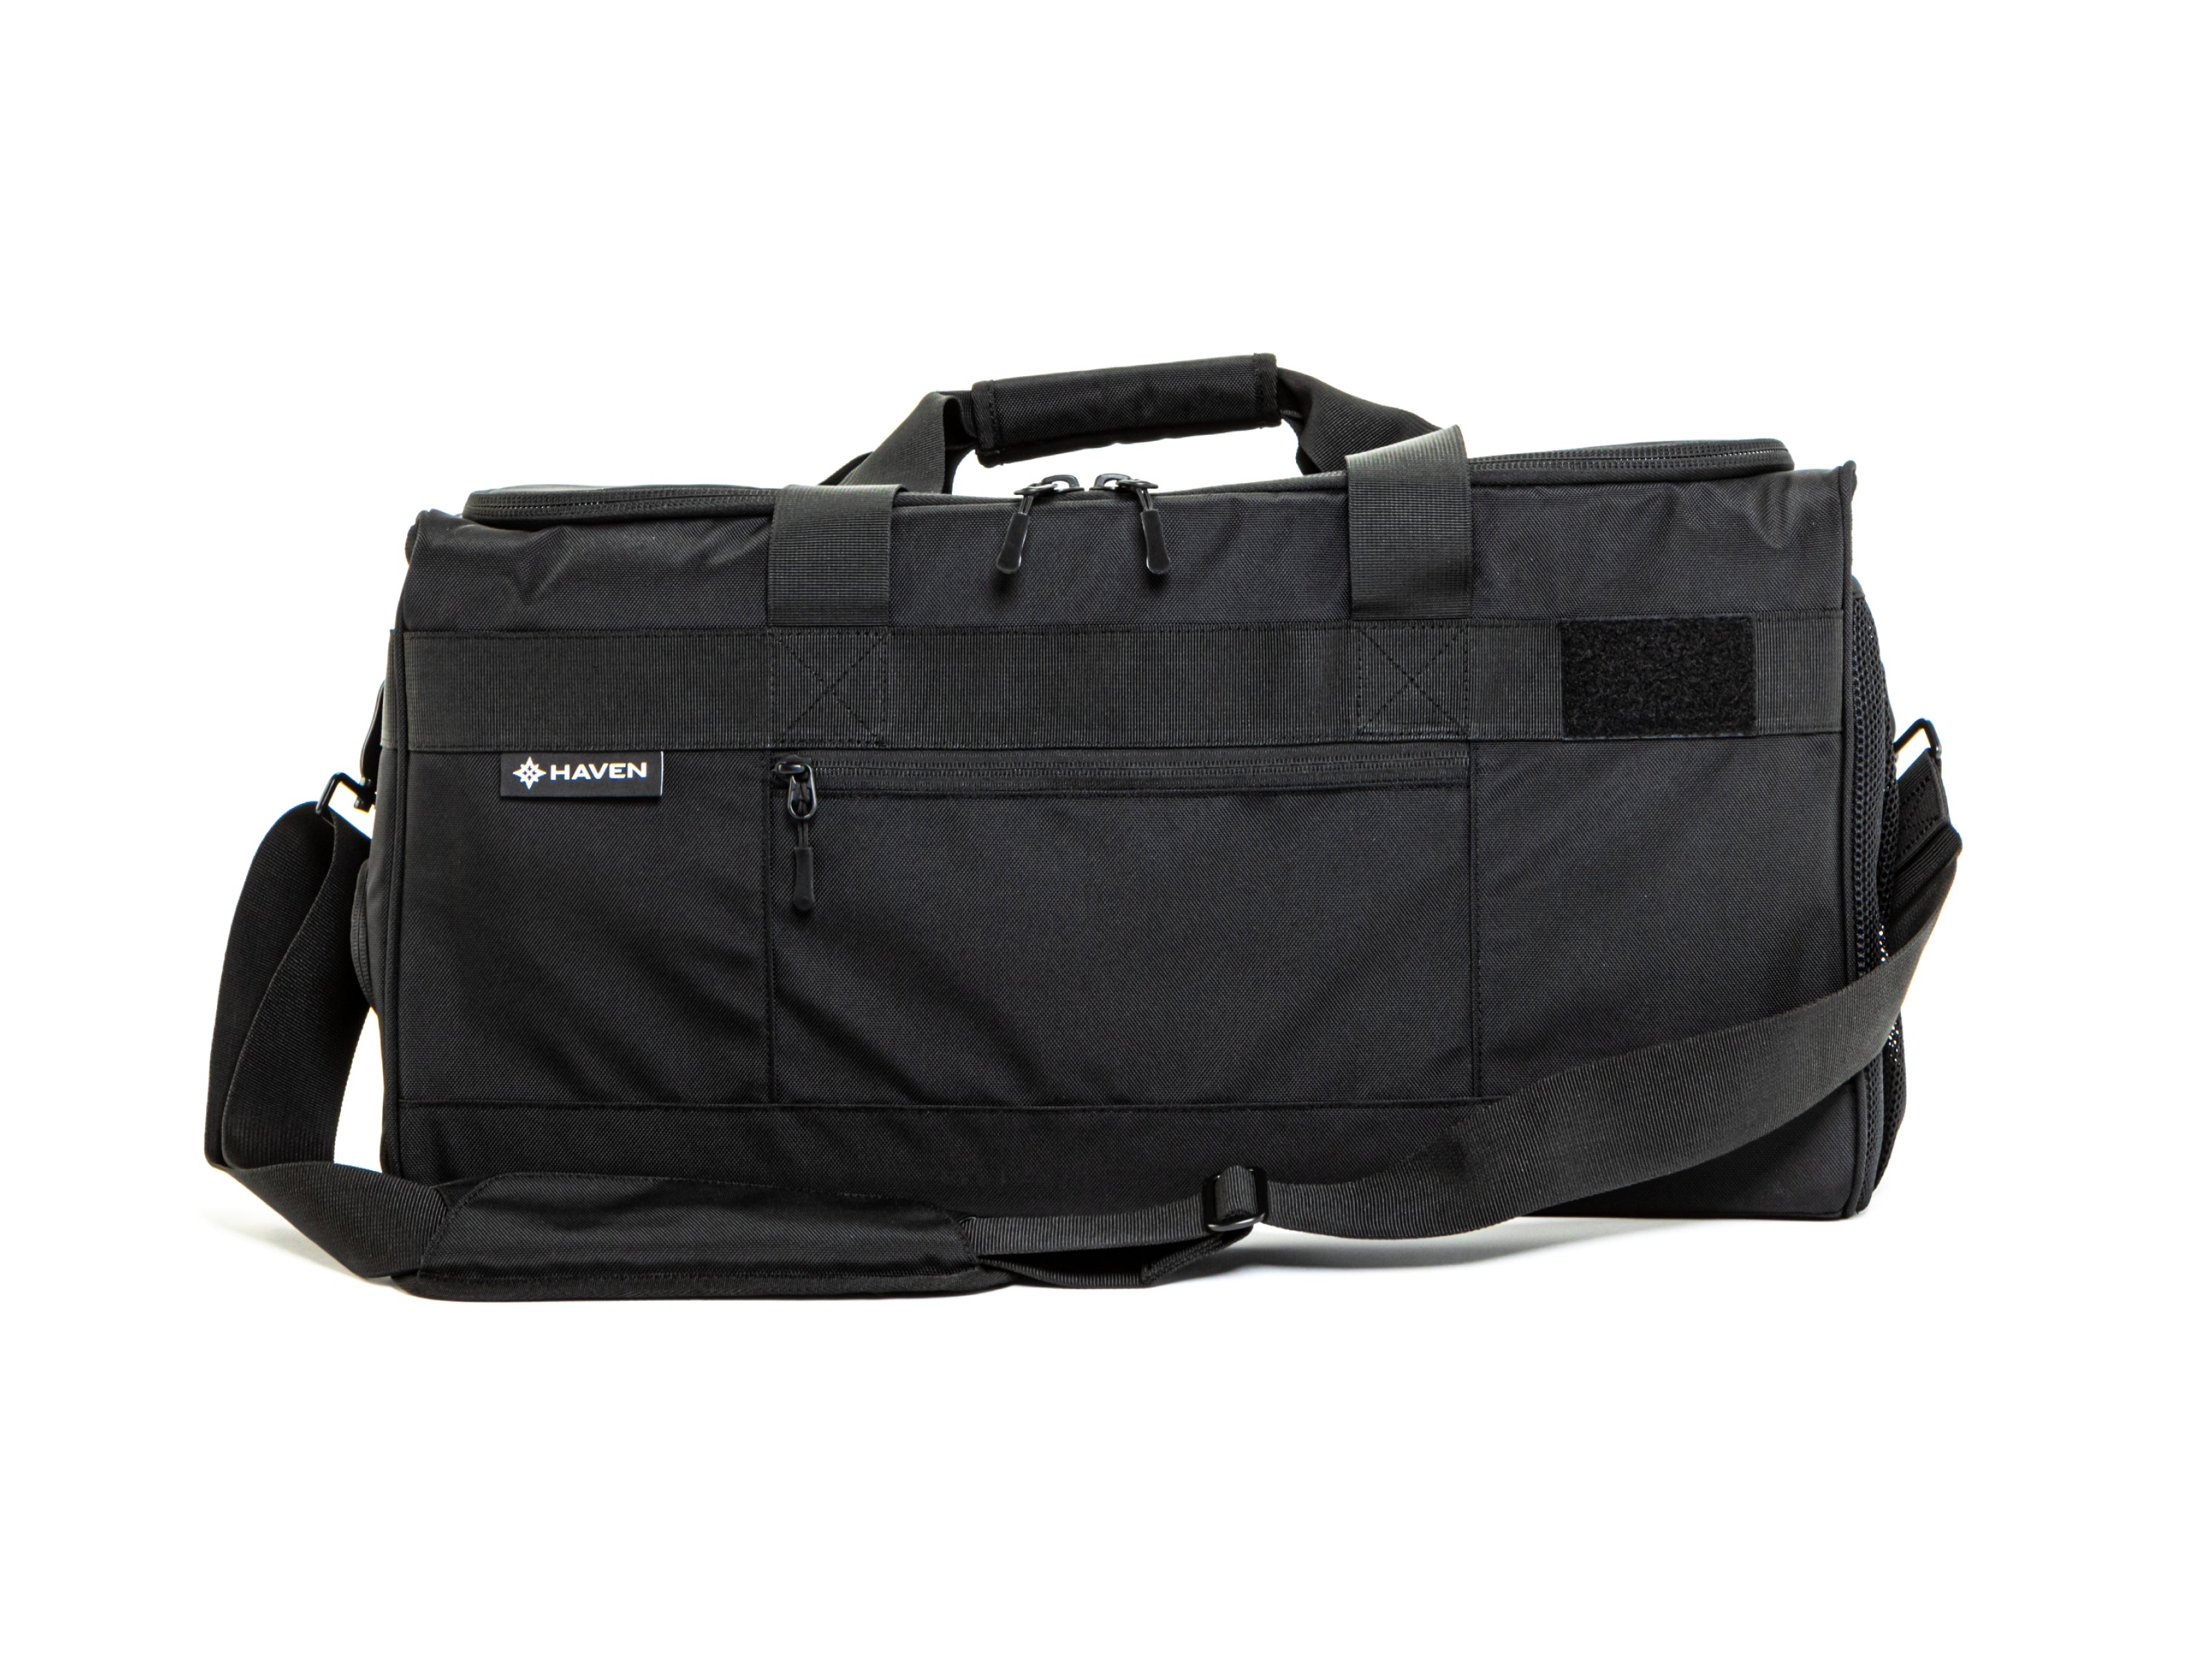 Haven Athletic - The Large Duffel